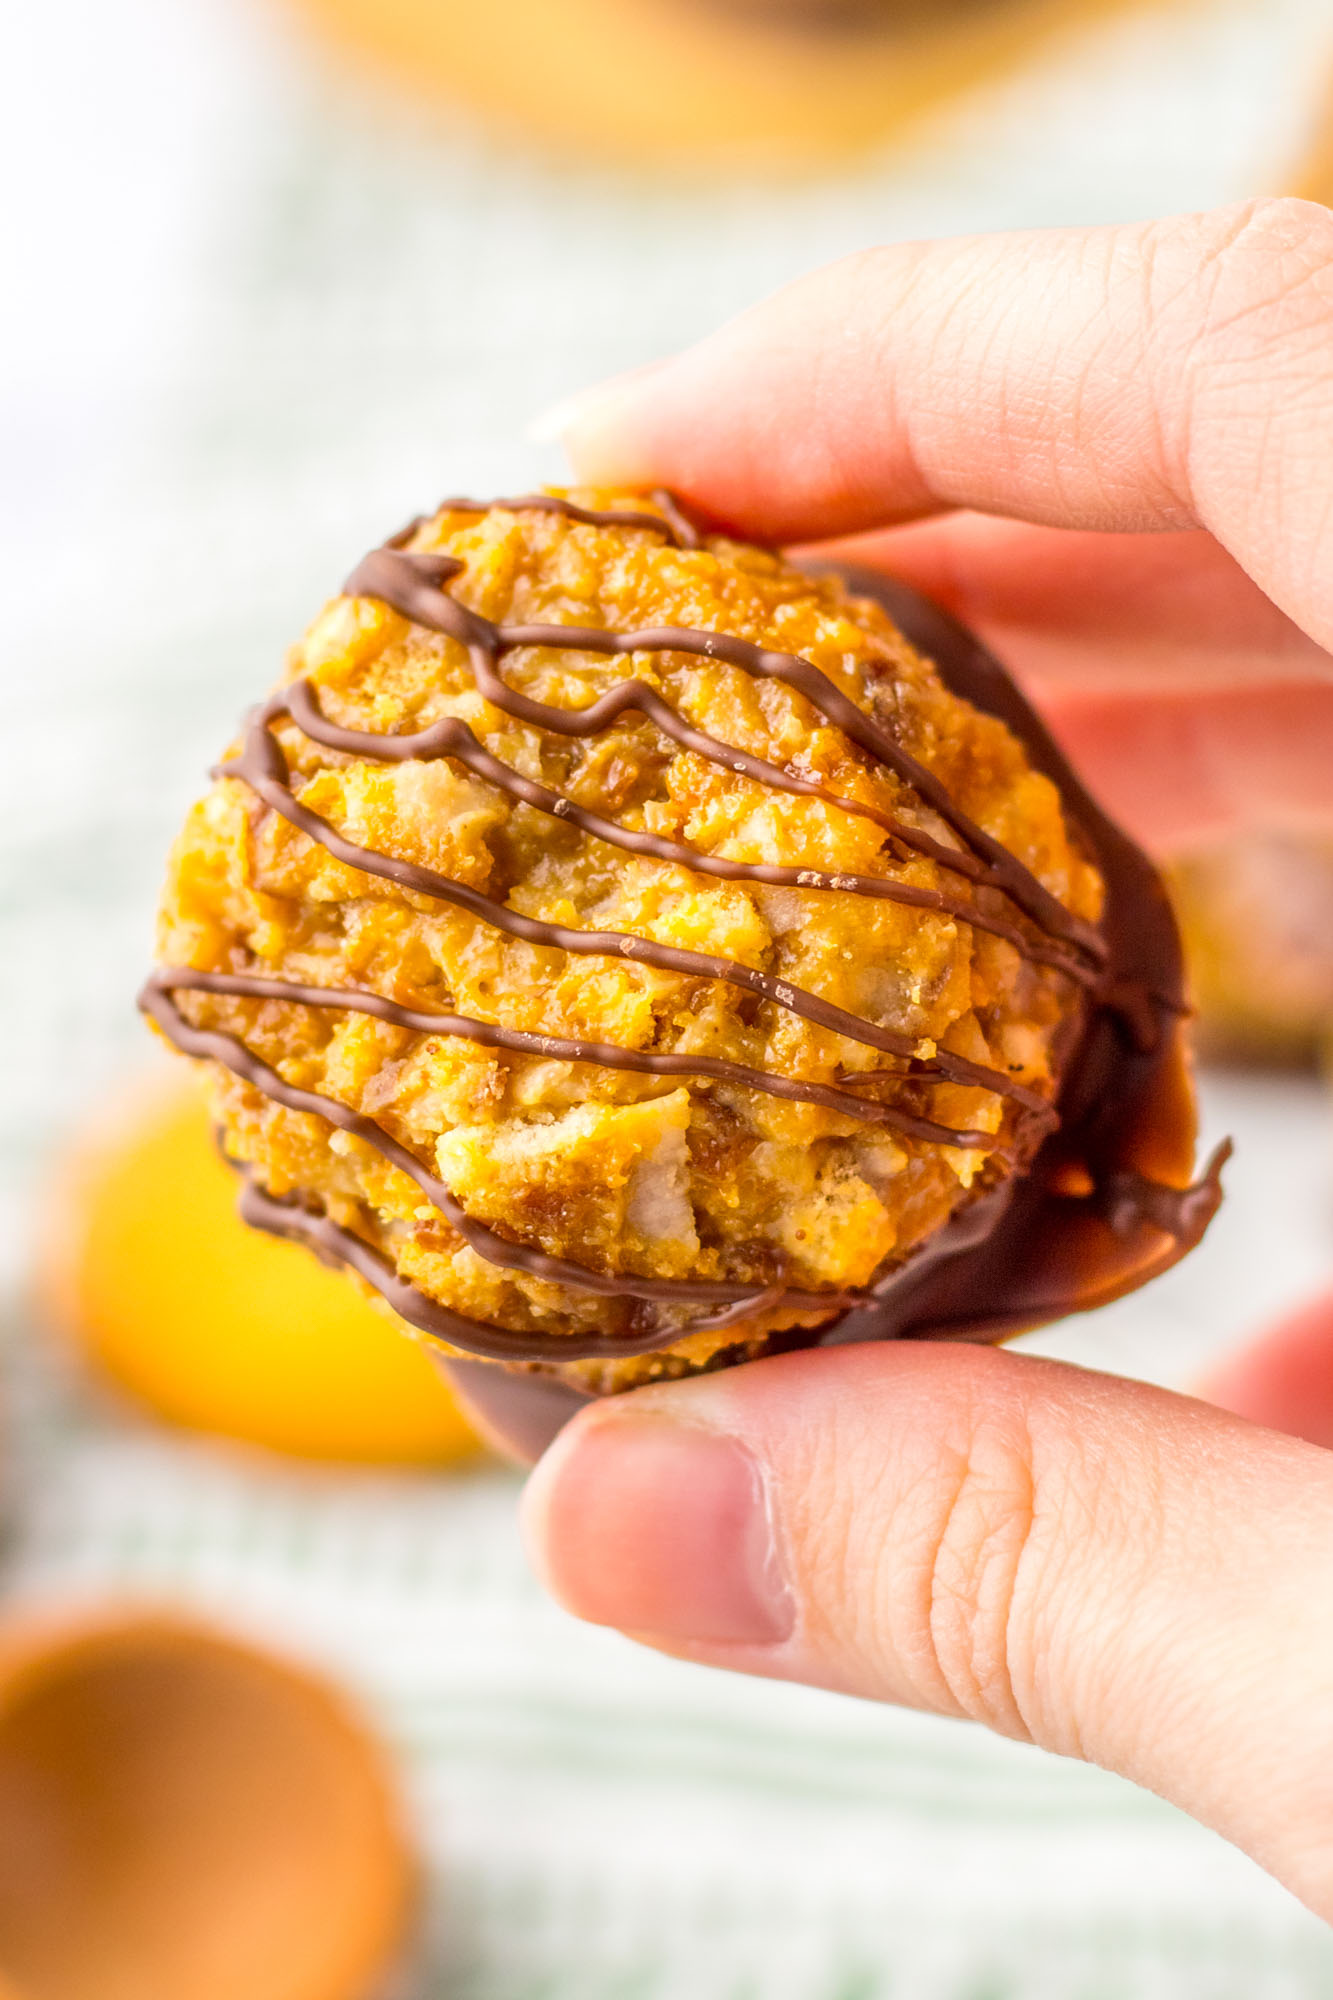 Holding a samoas truffle to show its texture up close